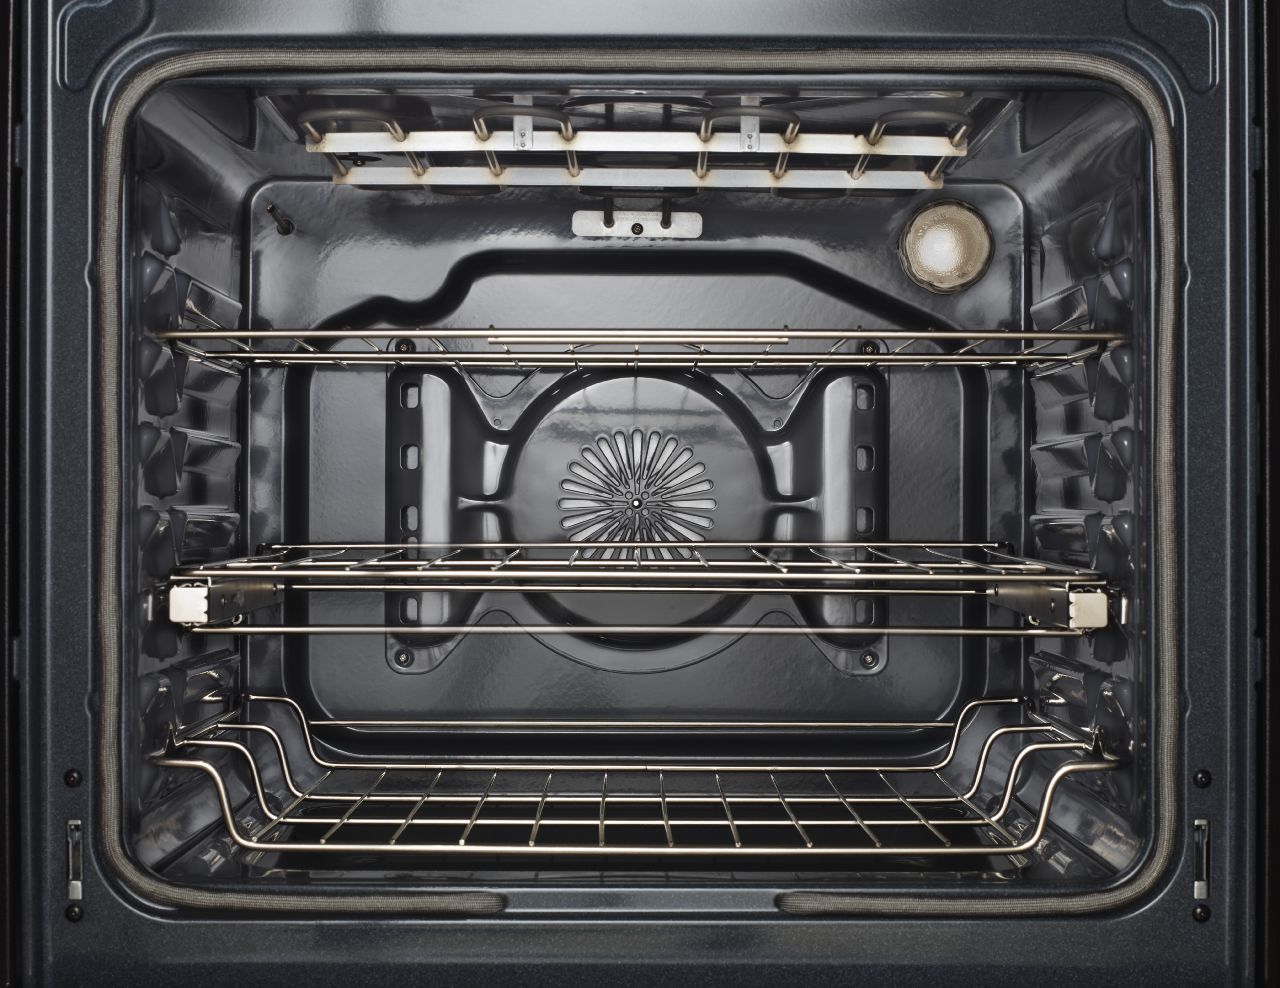 How To Replace An Oven Light Bulb For New And Older Ovens